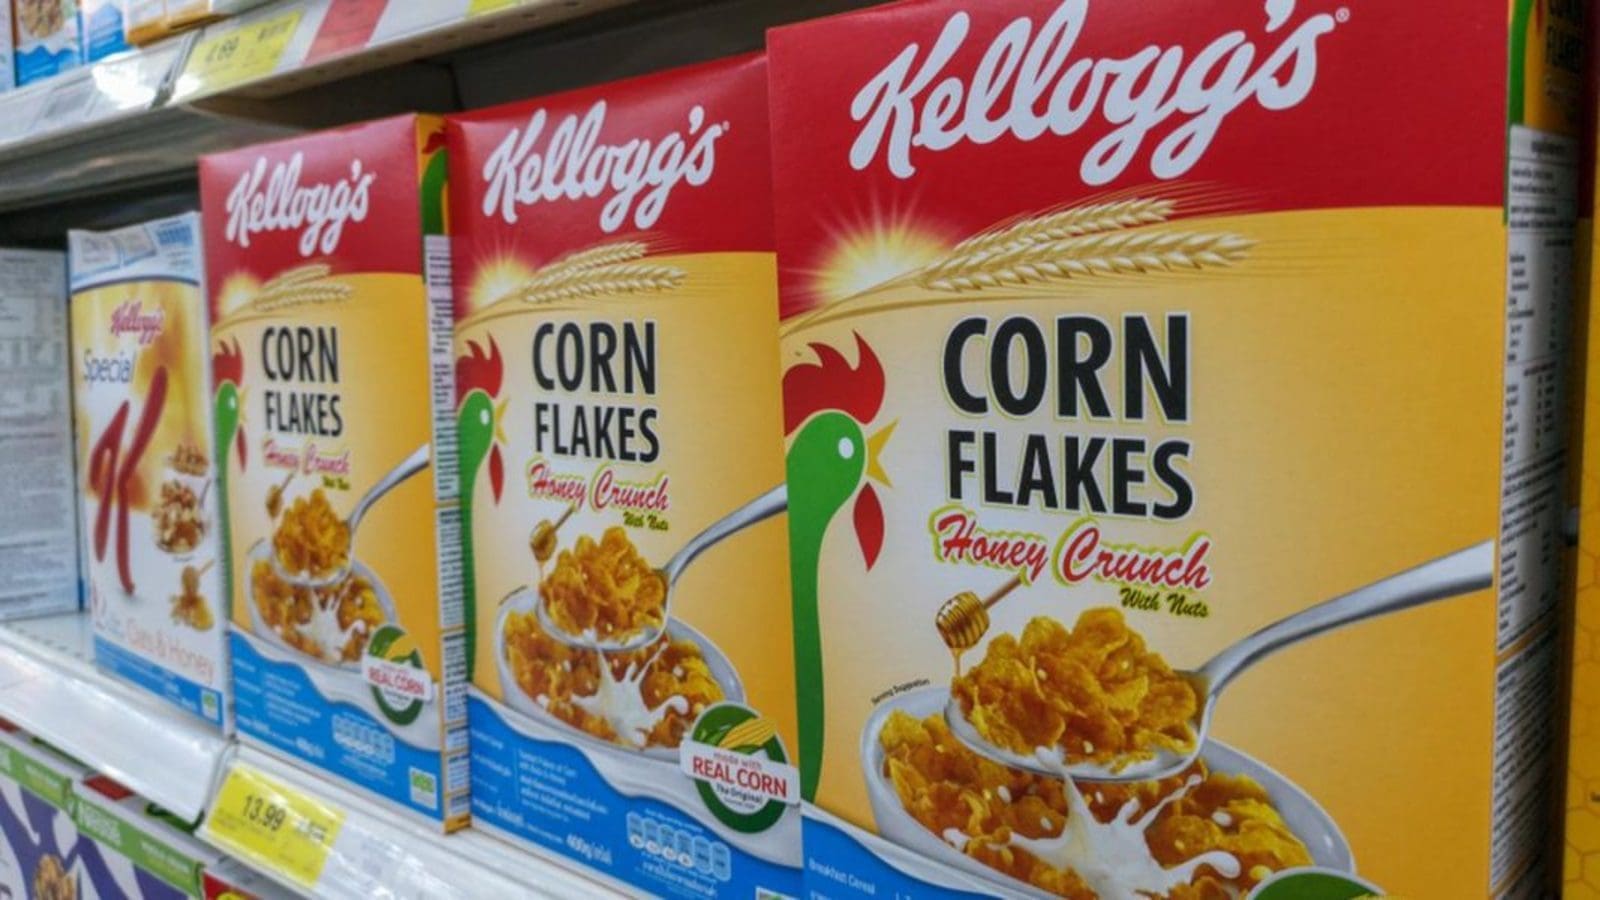 Kellogg fully exits Russia with sale of operations to local firm Chernogolovka